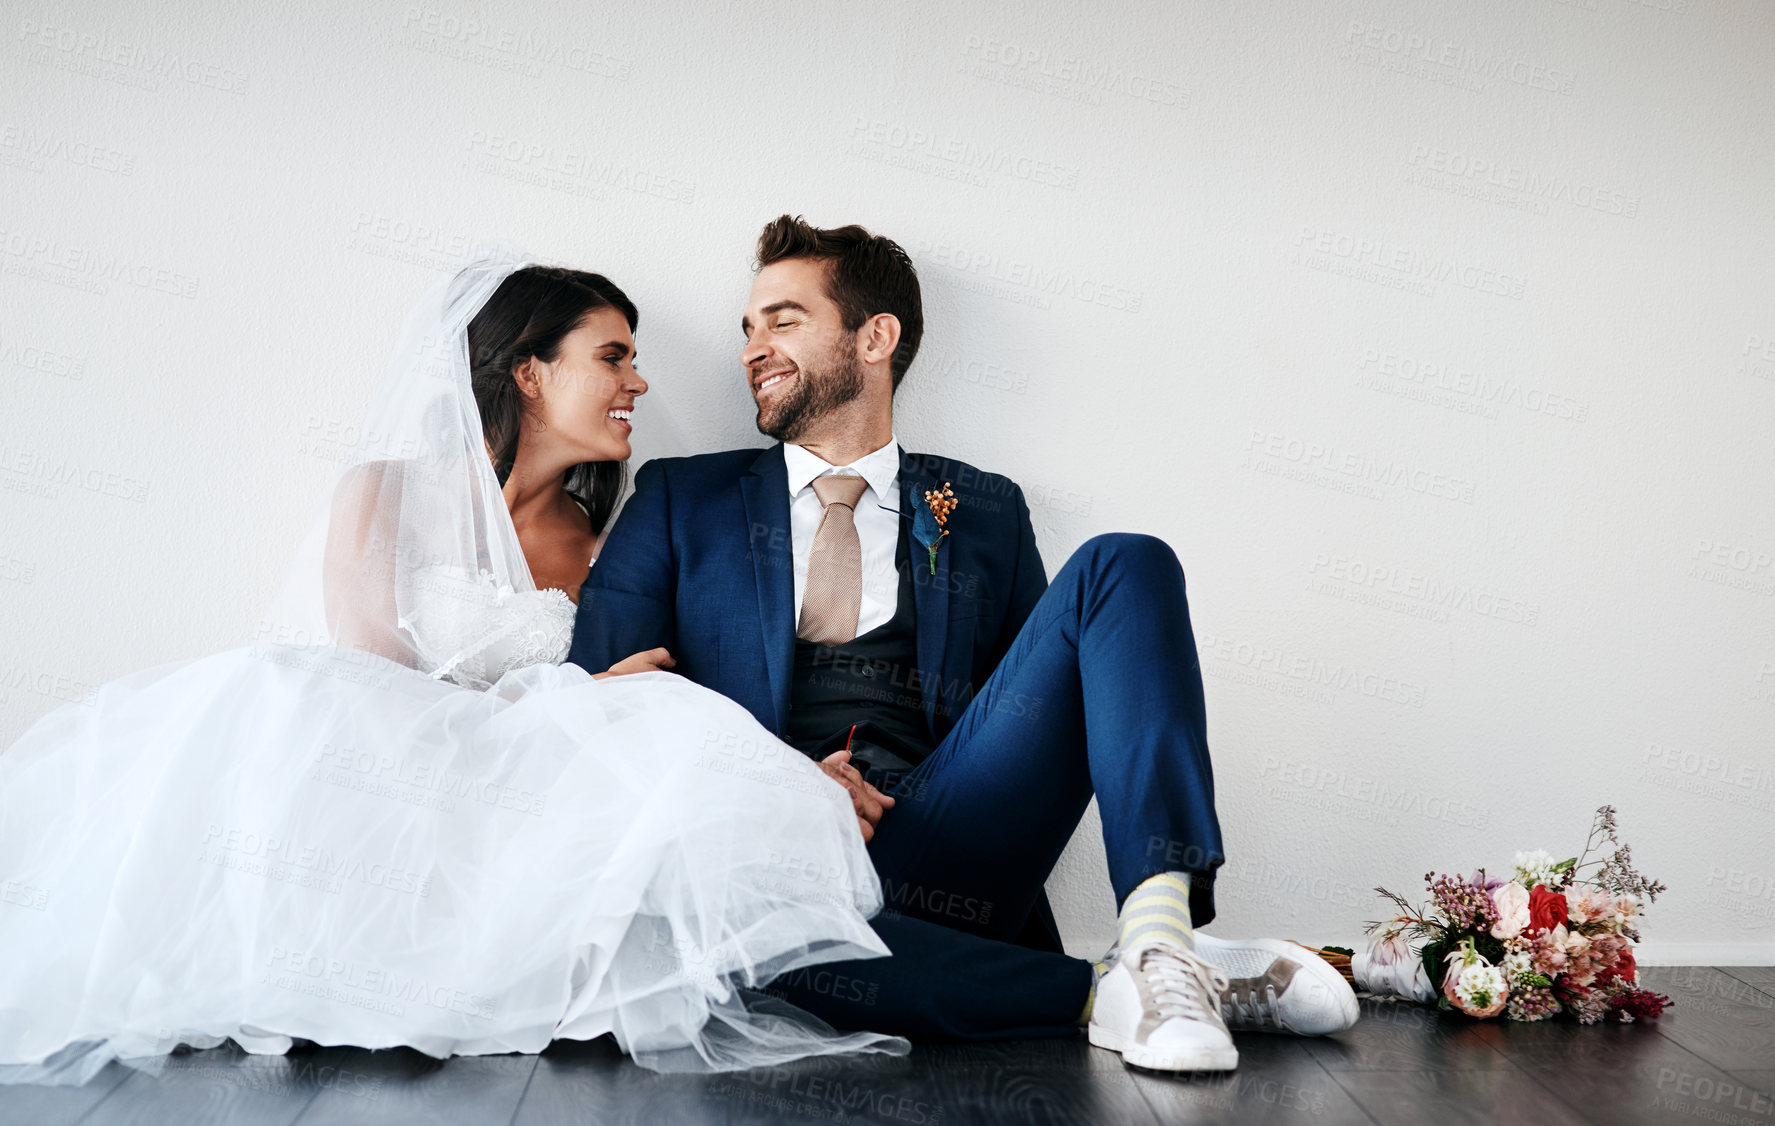 Buy stock photo Studio shot of a newly married young couple sitting together on the floor against a gray background